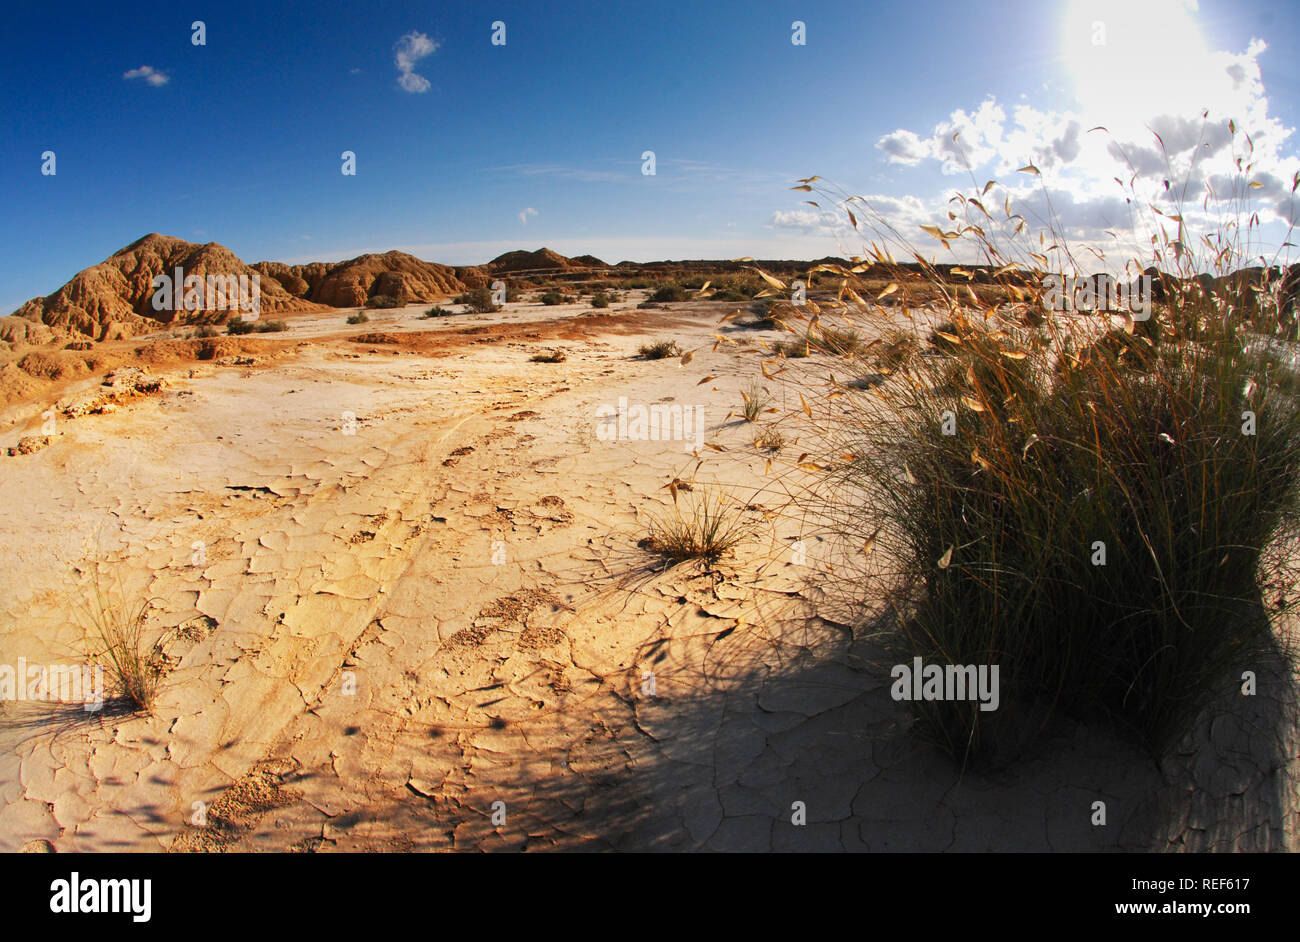 images of the semi-desert territory of the bardenas reales, located in the Navarra region of Spain Stock Photo